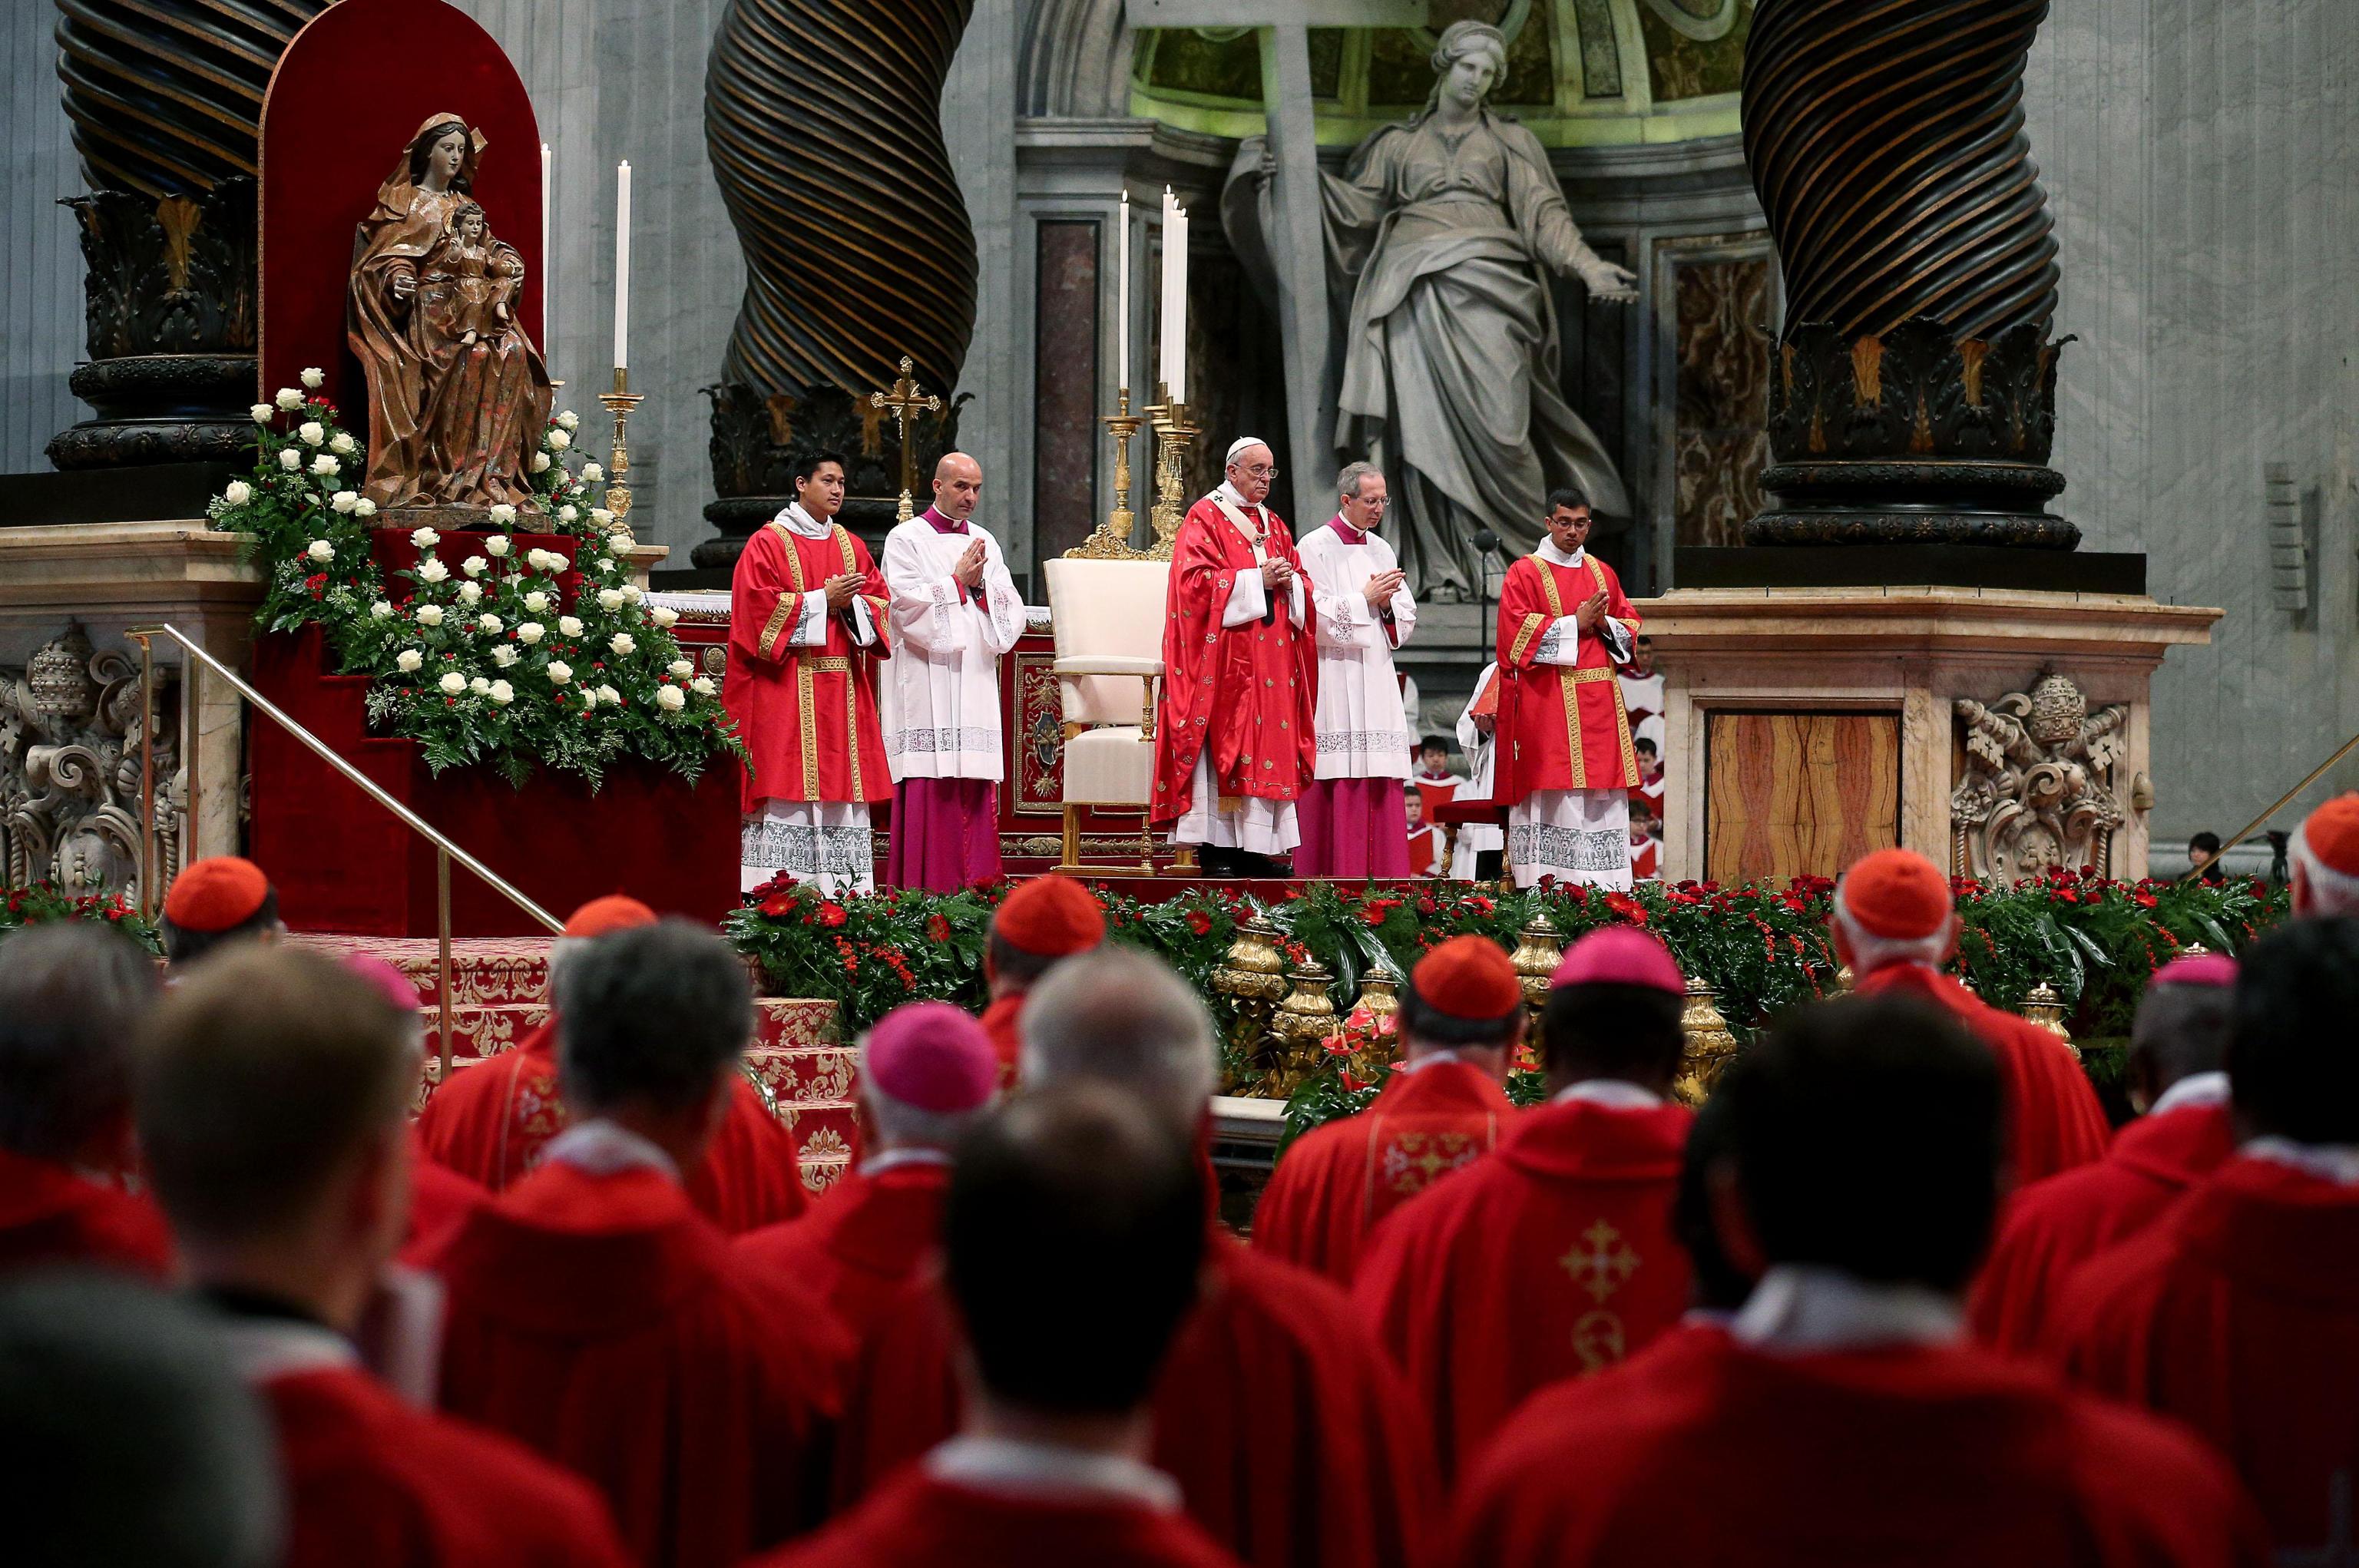 Pope Francis celebrates Holy Mass on Pentecost Sunday in the Saint Peter's basilica in Rome